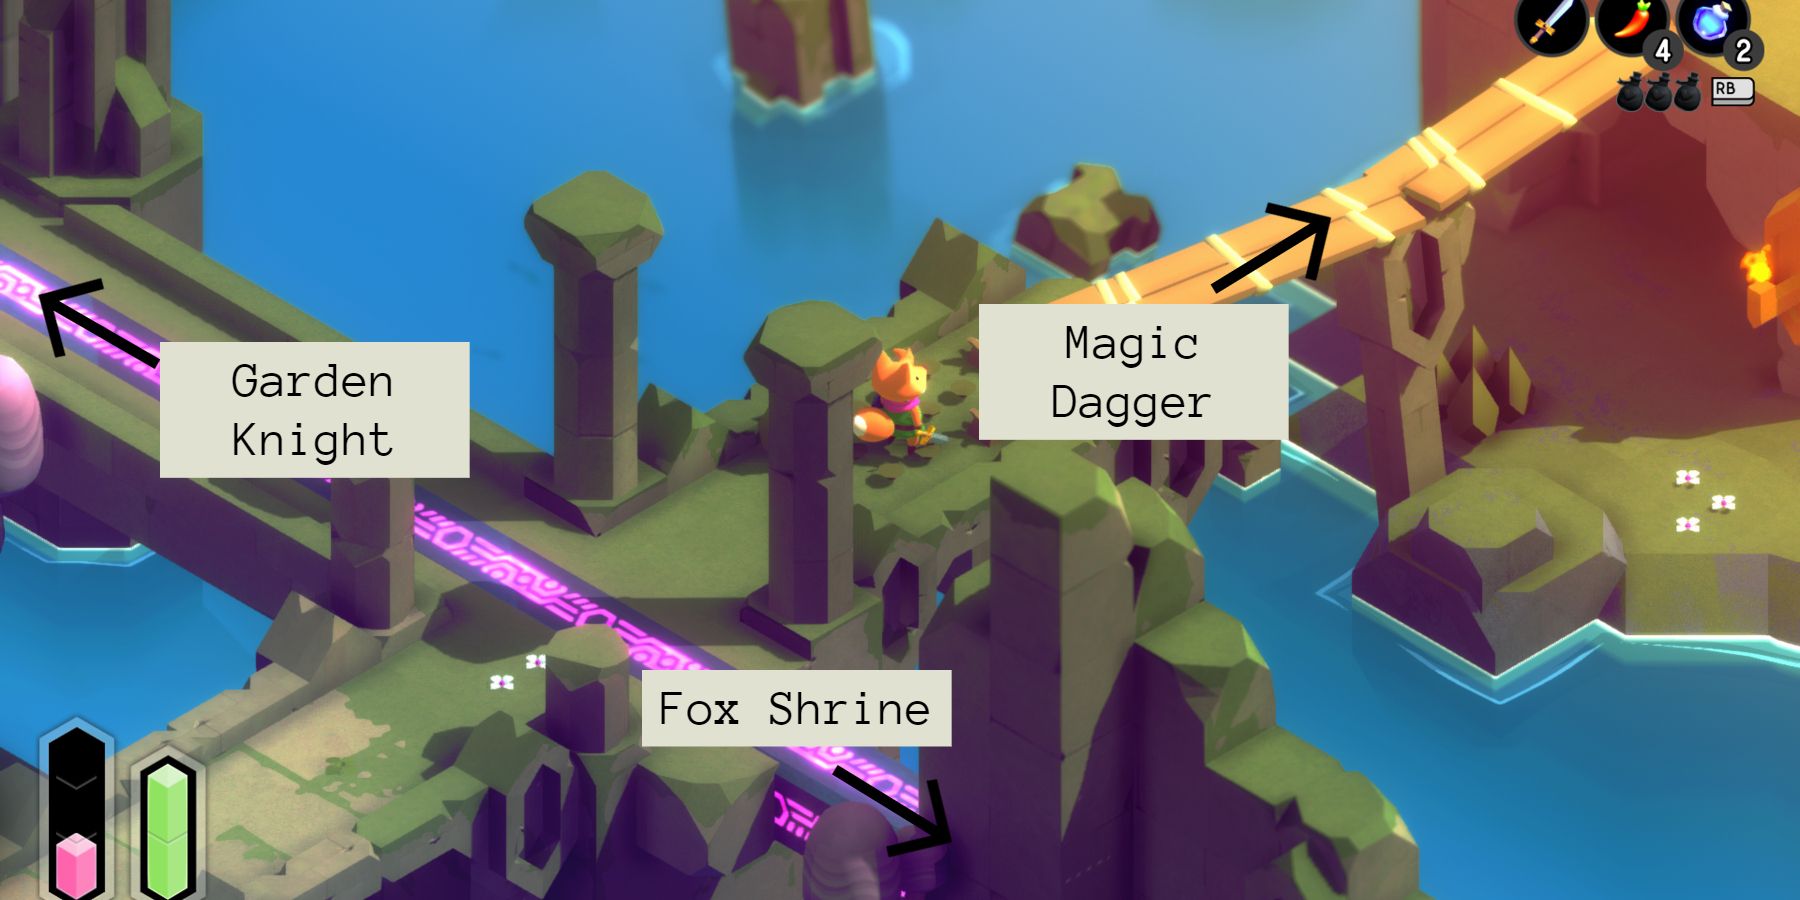 a red fox at a bridge crossing with four different paths. black arrows point to three of the directions: the bottom right points to "fox shrine"; the upper left points to "garden knight"; and the upper right points to "magic dagger"